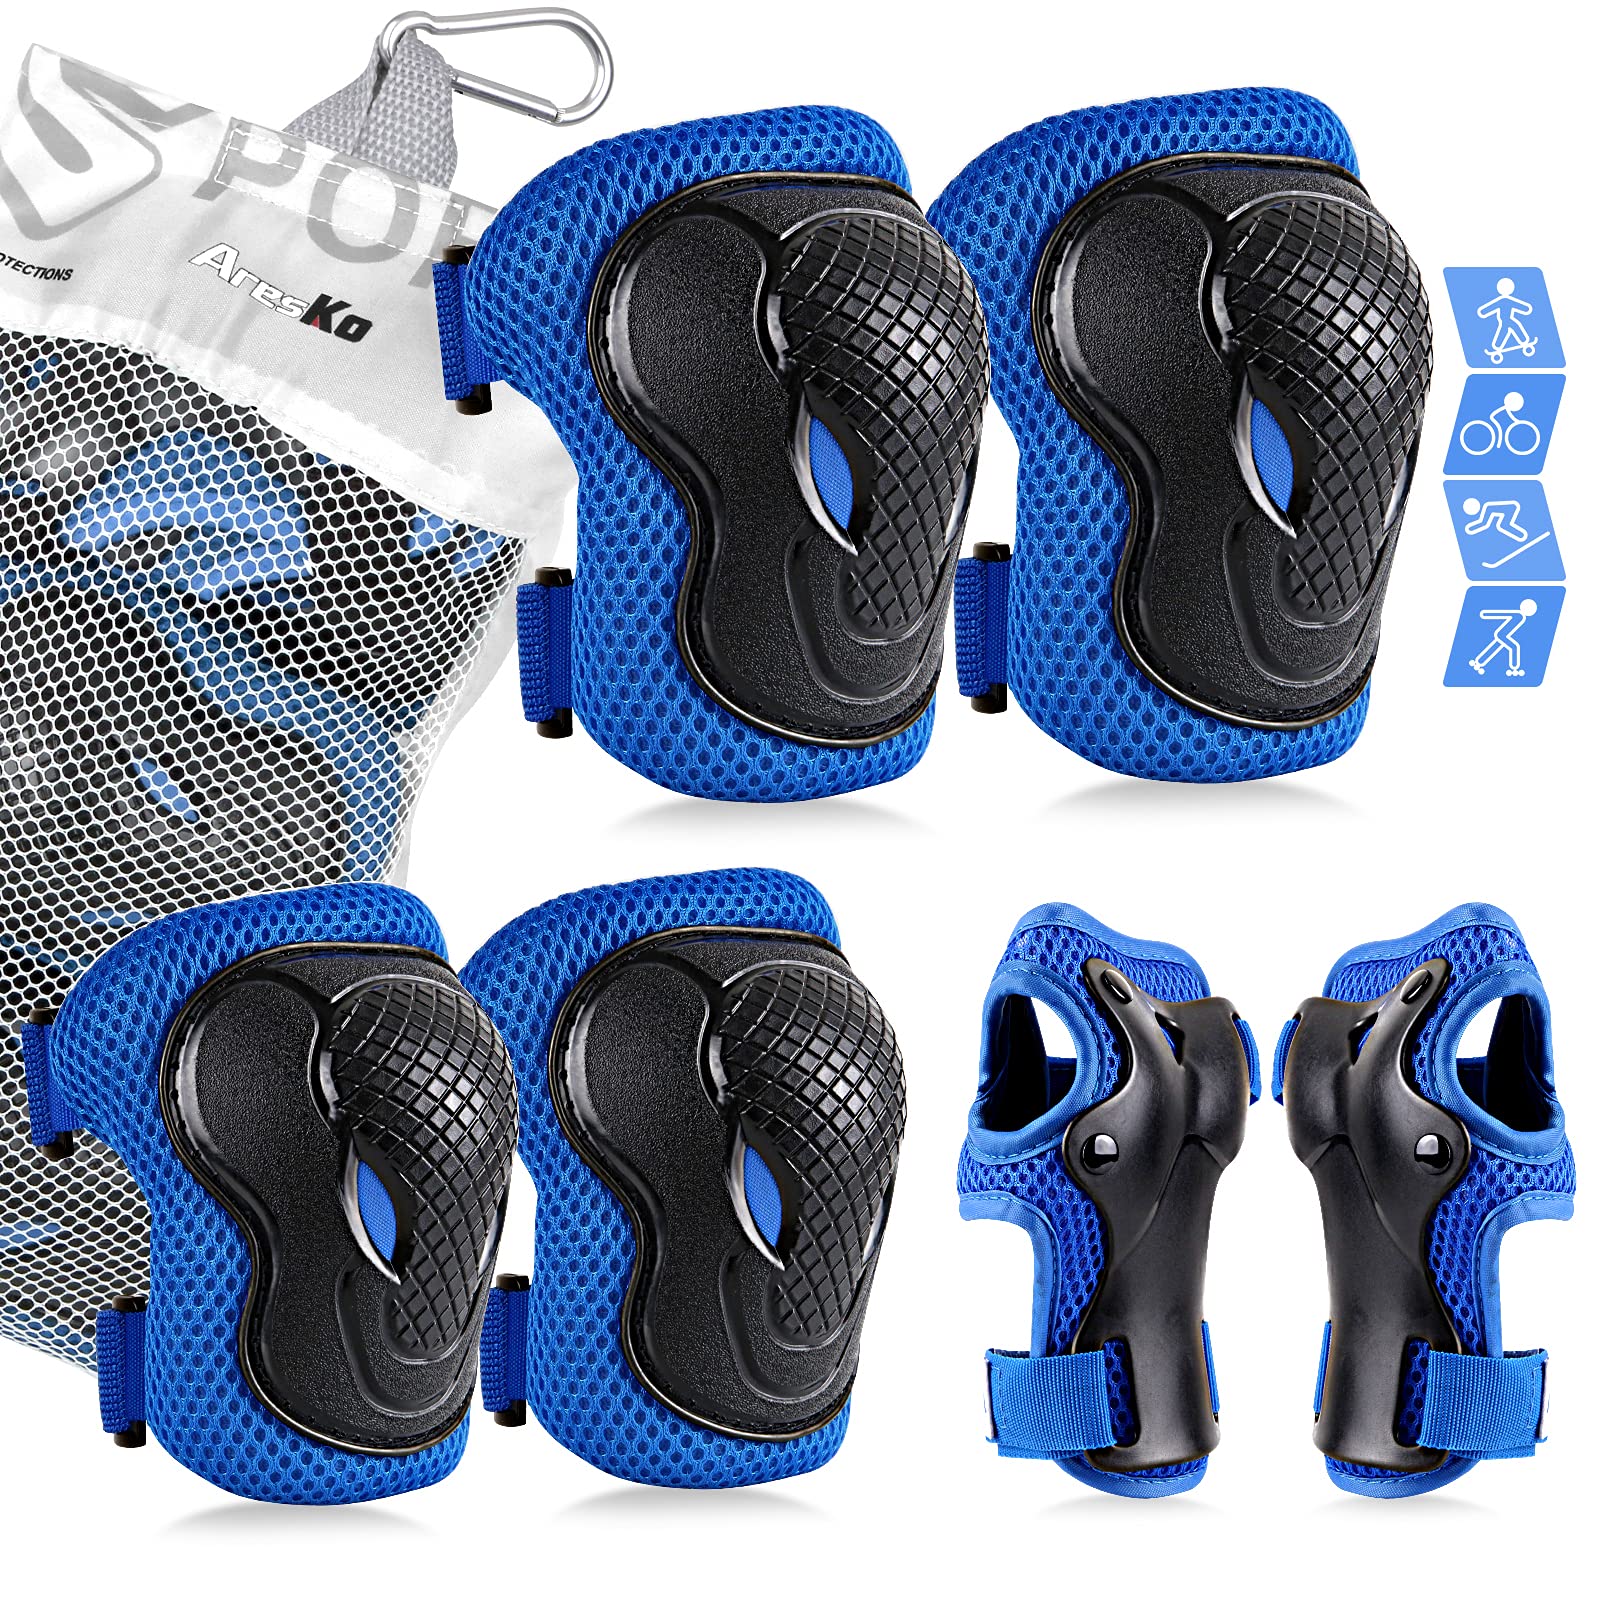 Children Knee Pads 6-in-1 Protective Gear Set Elbow Pads Guards